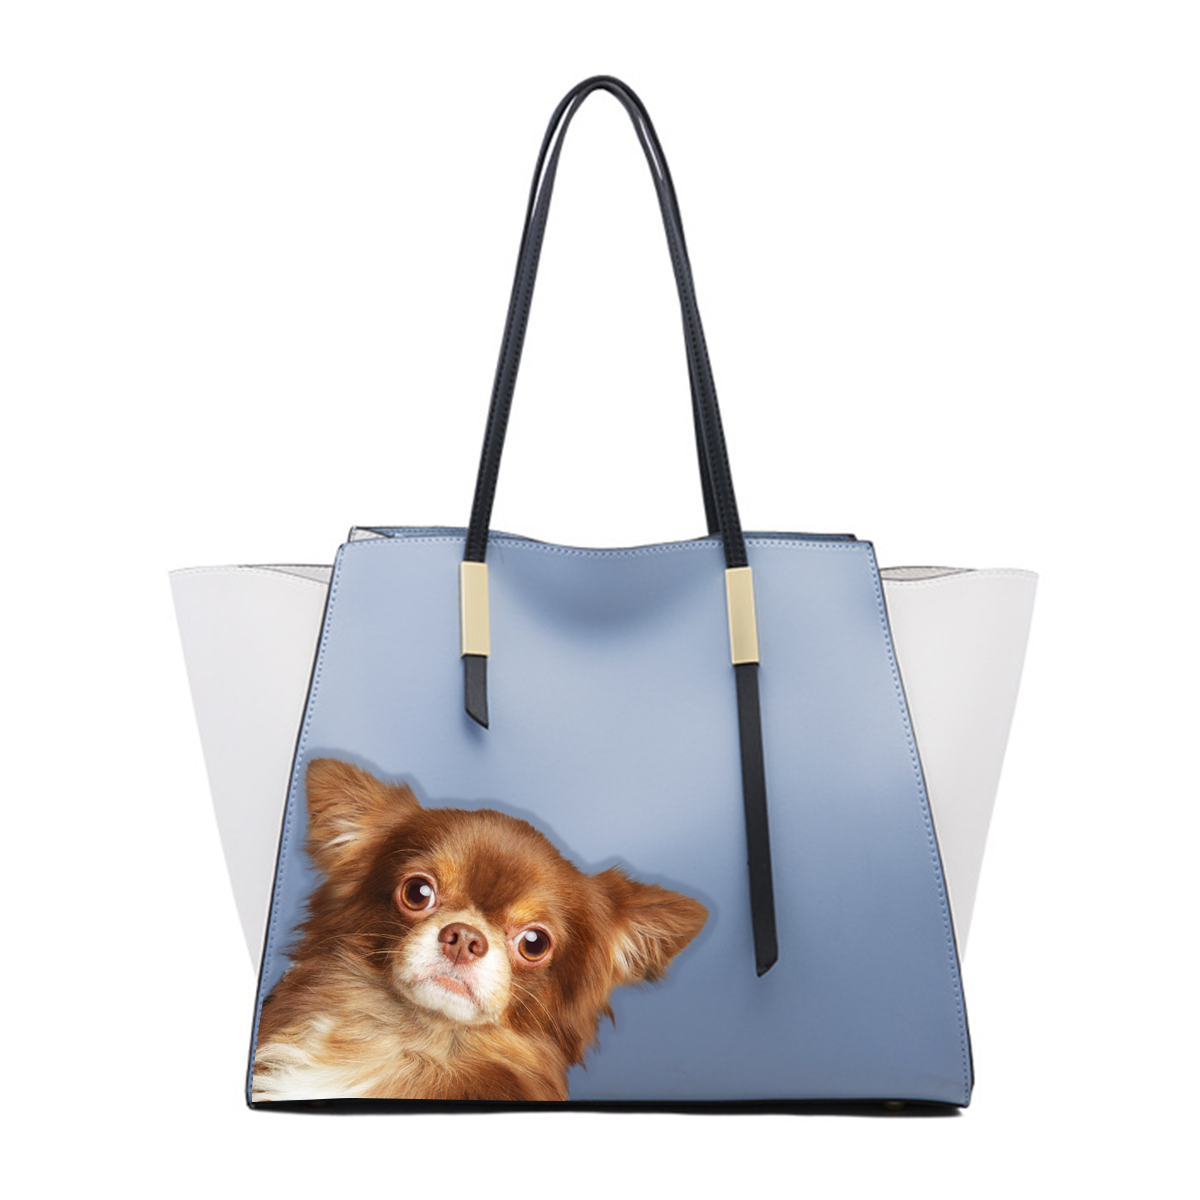 Hey, What's Up Man - Dreamy Chihuahua Tote Bag V3